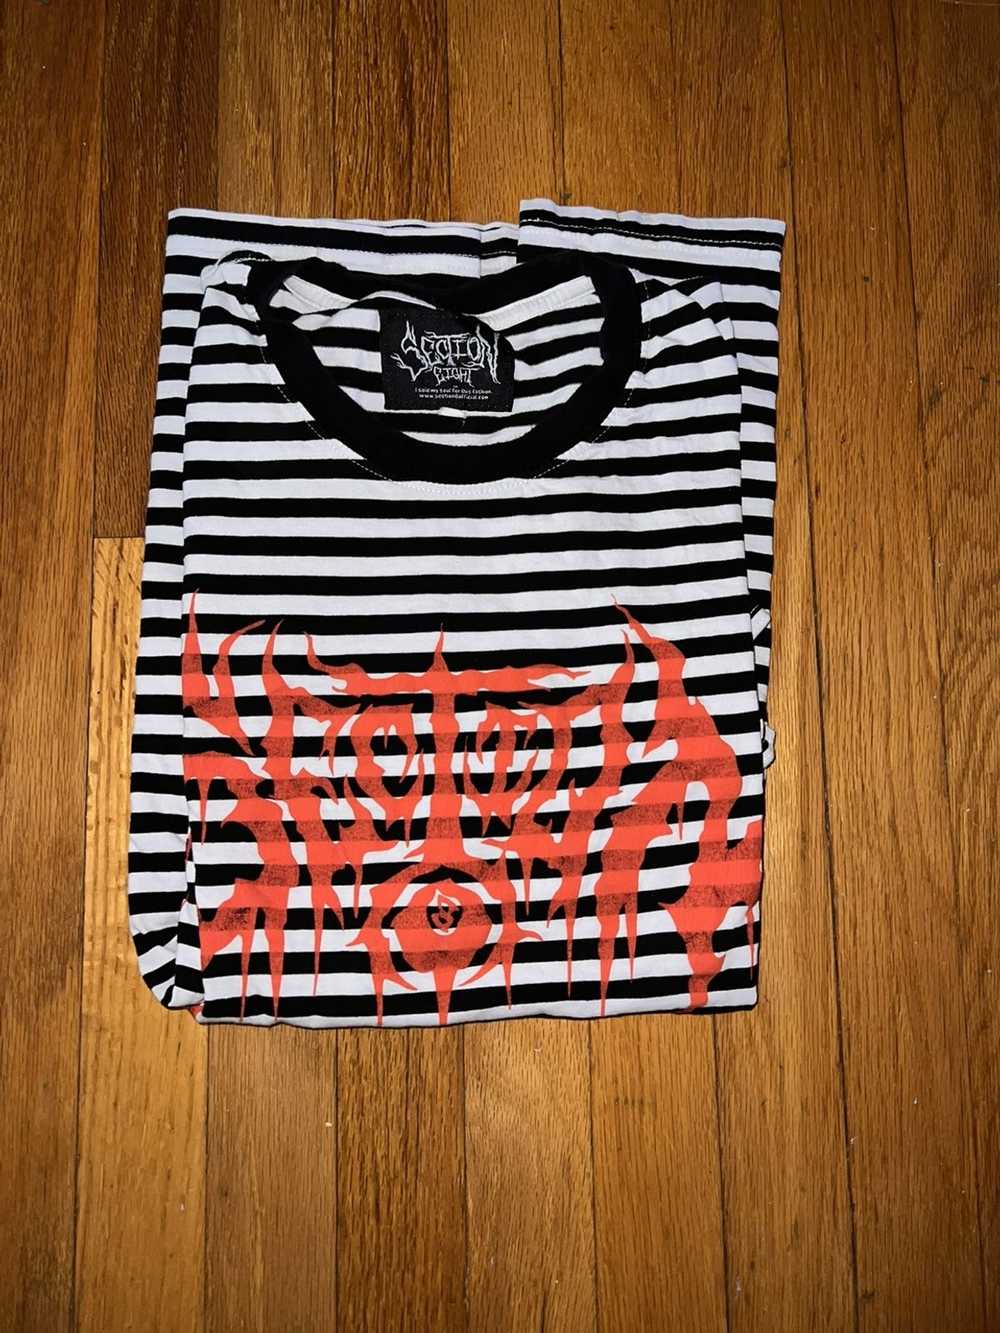 Section 8 SECTION 8 SKULL STRIPED TSHIRT - image 4